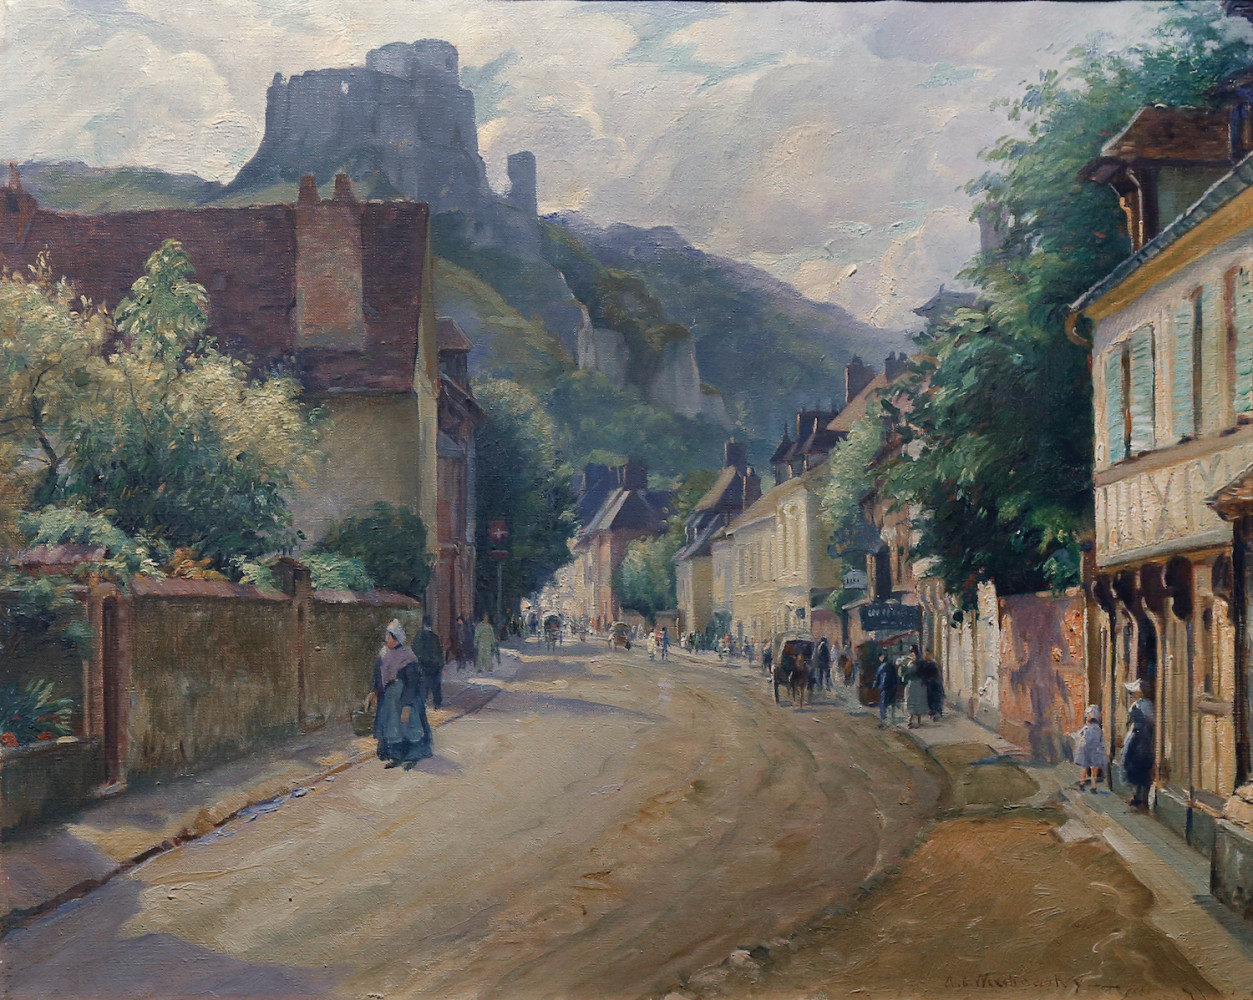 Les Andelys, Normandy with the ruins of Chateau Gaillard in the distance by Abel G. Warshawsky